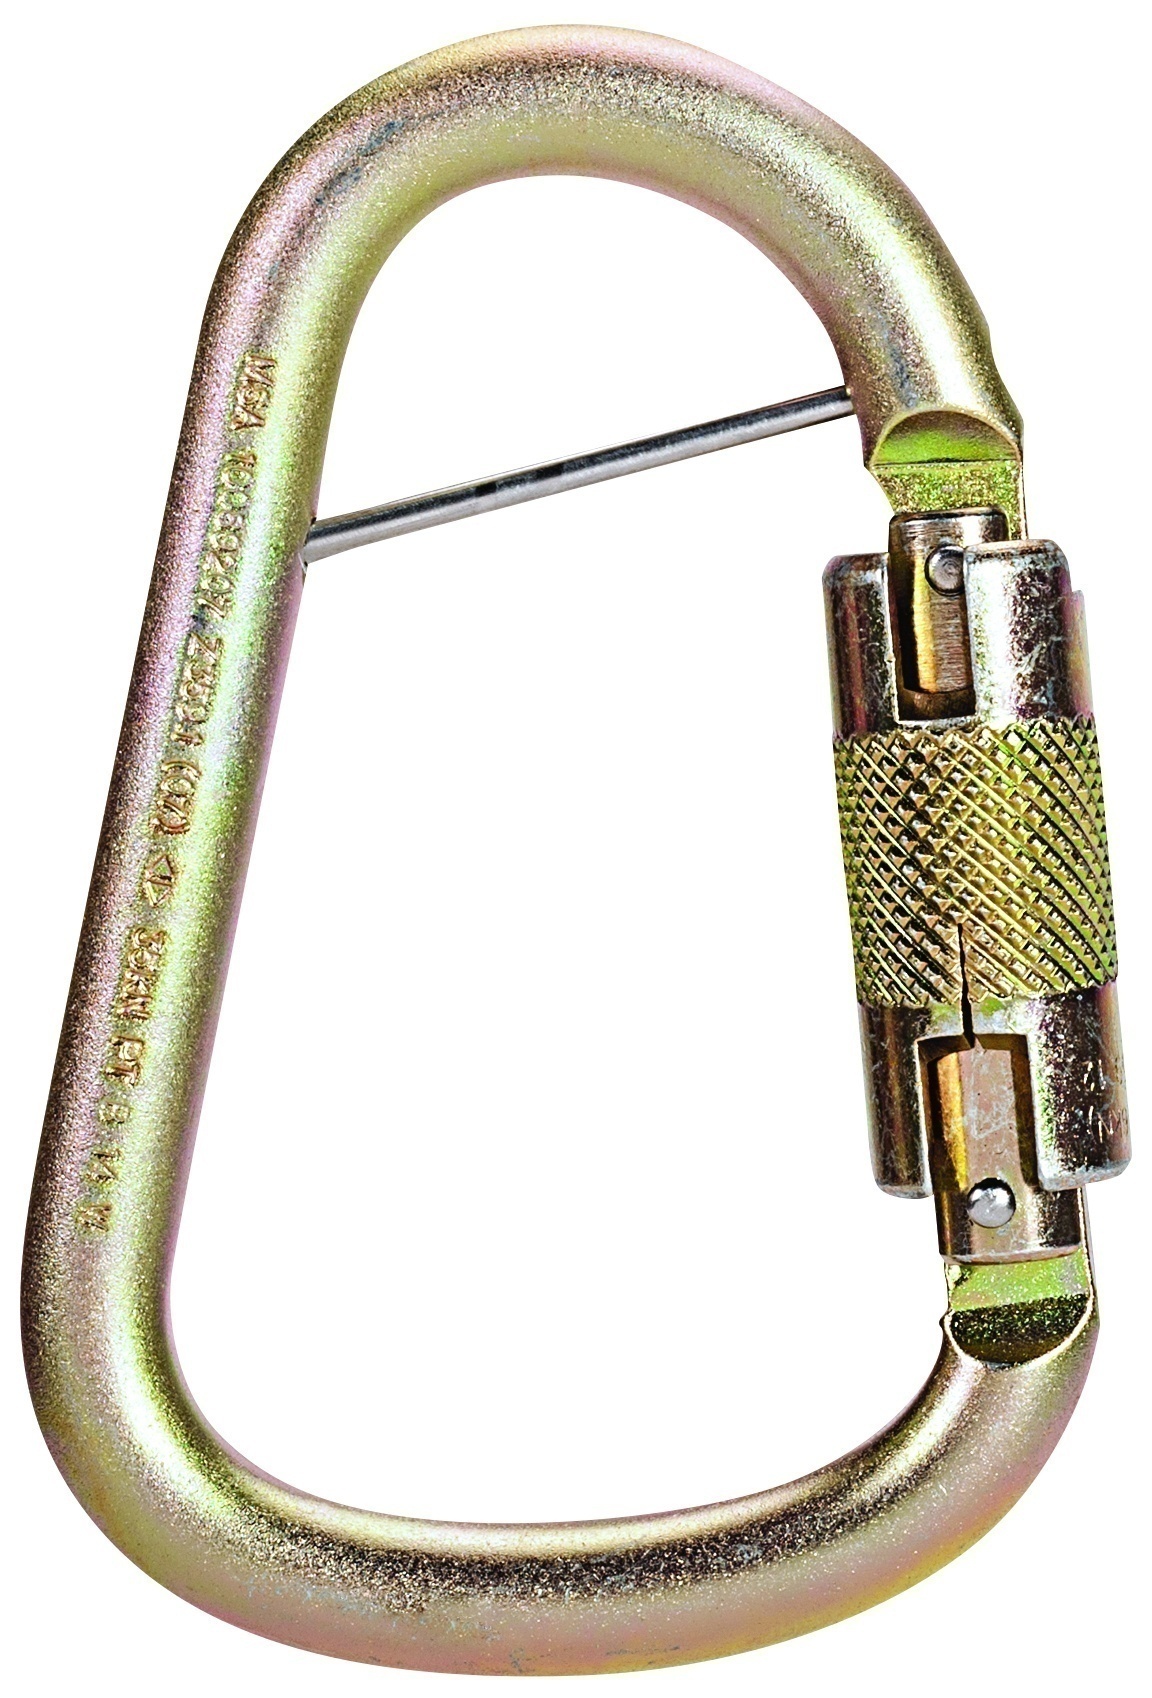 MSA Auto-Locking 1 Inch Steel Carabiner from Columbia Safety